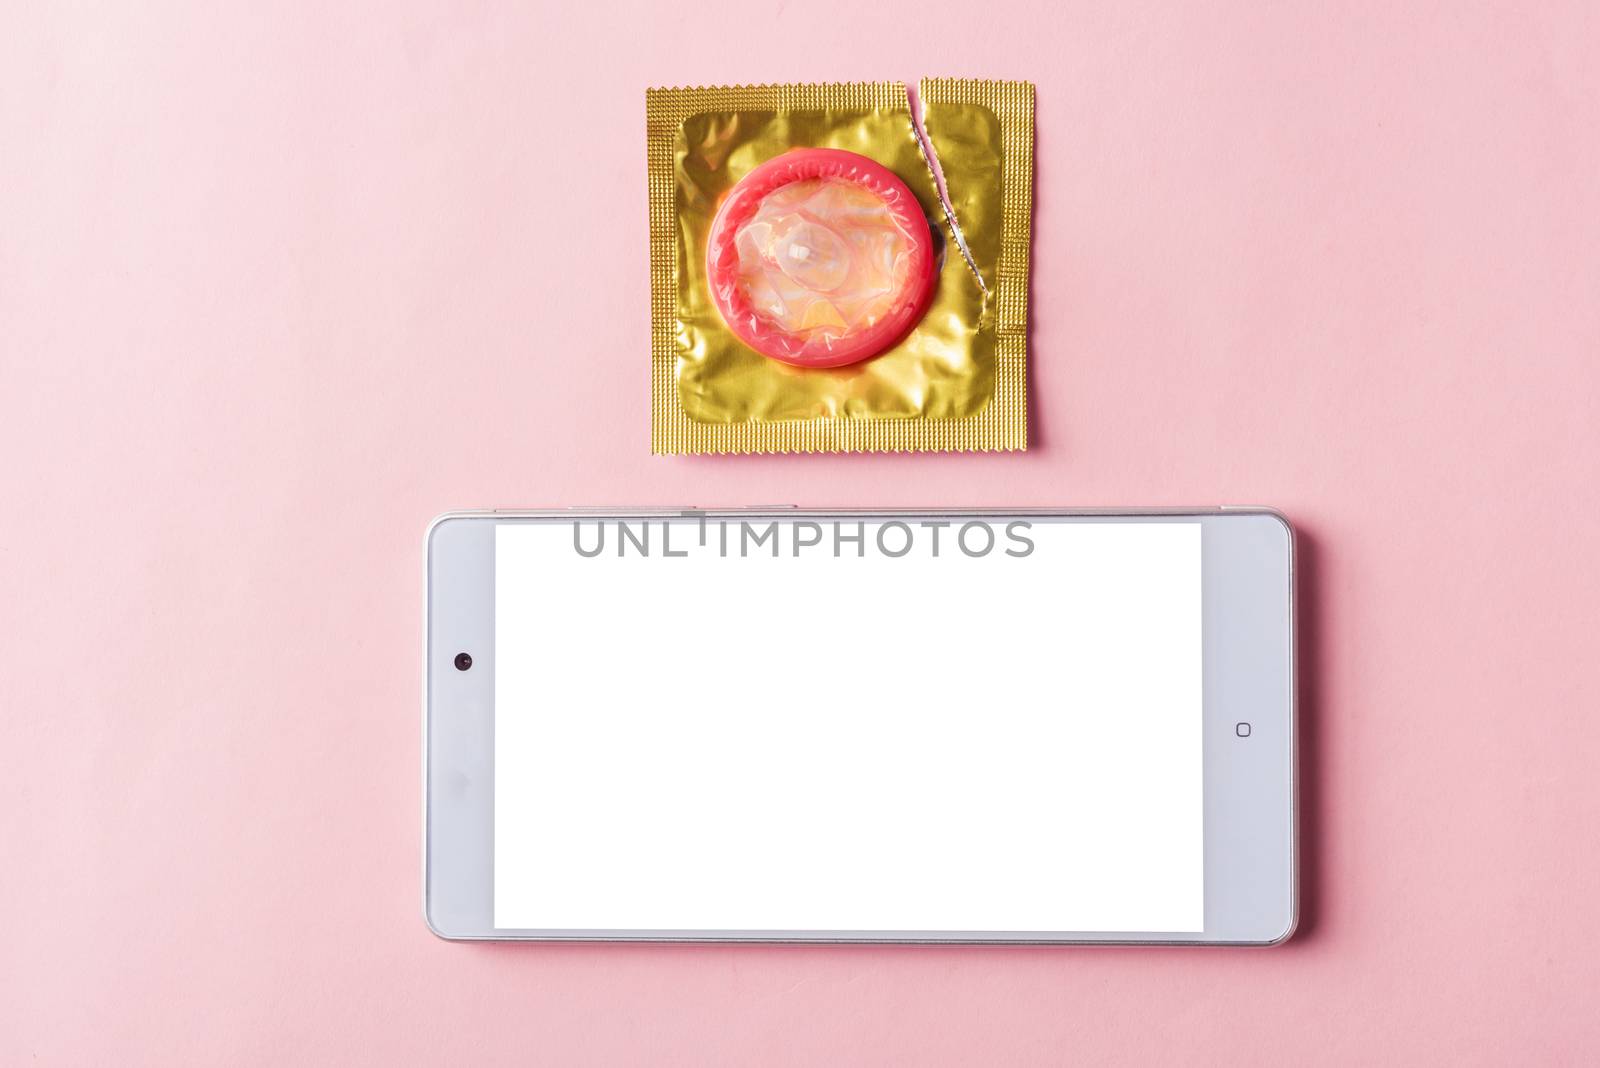 World sexual health or Aids day, Top view flat lay condom in wrapper pack and smart mobile phone blank screen, studio shot isolated on a pink background, watching porn content on mobile phone concept